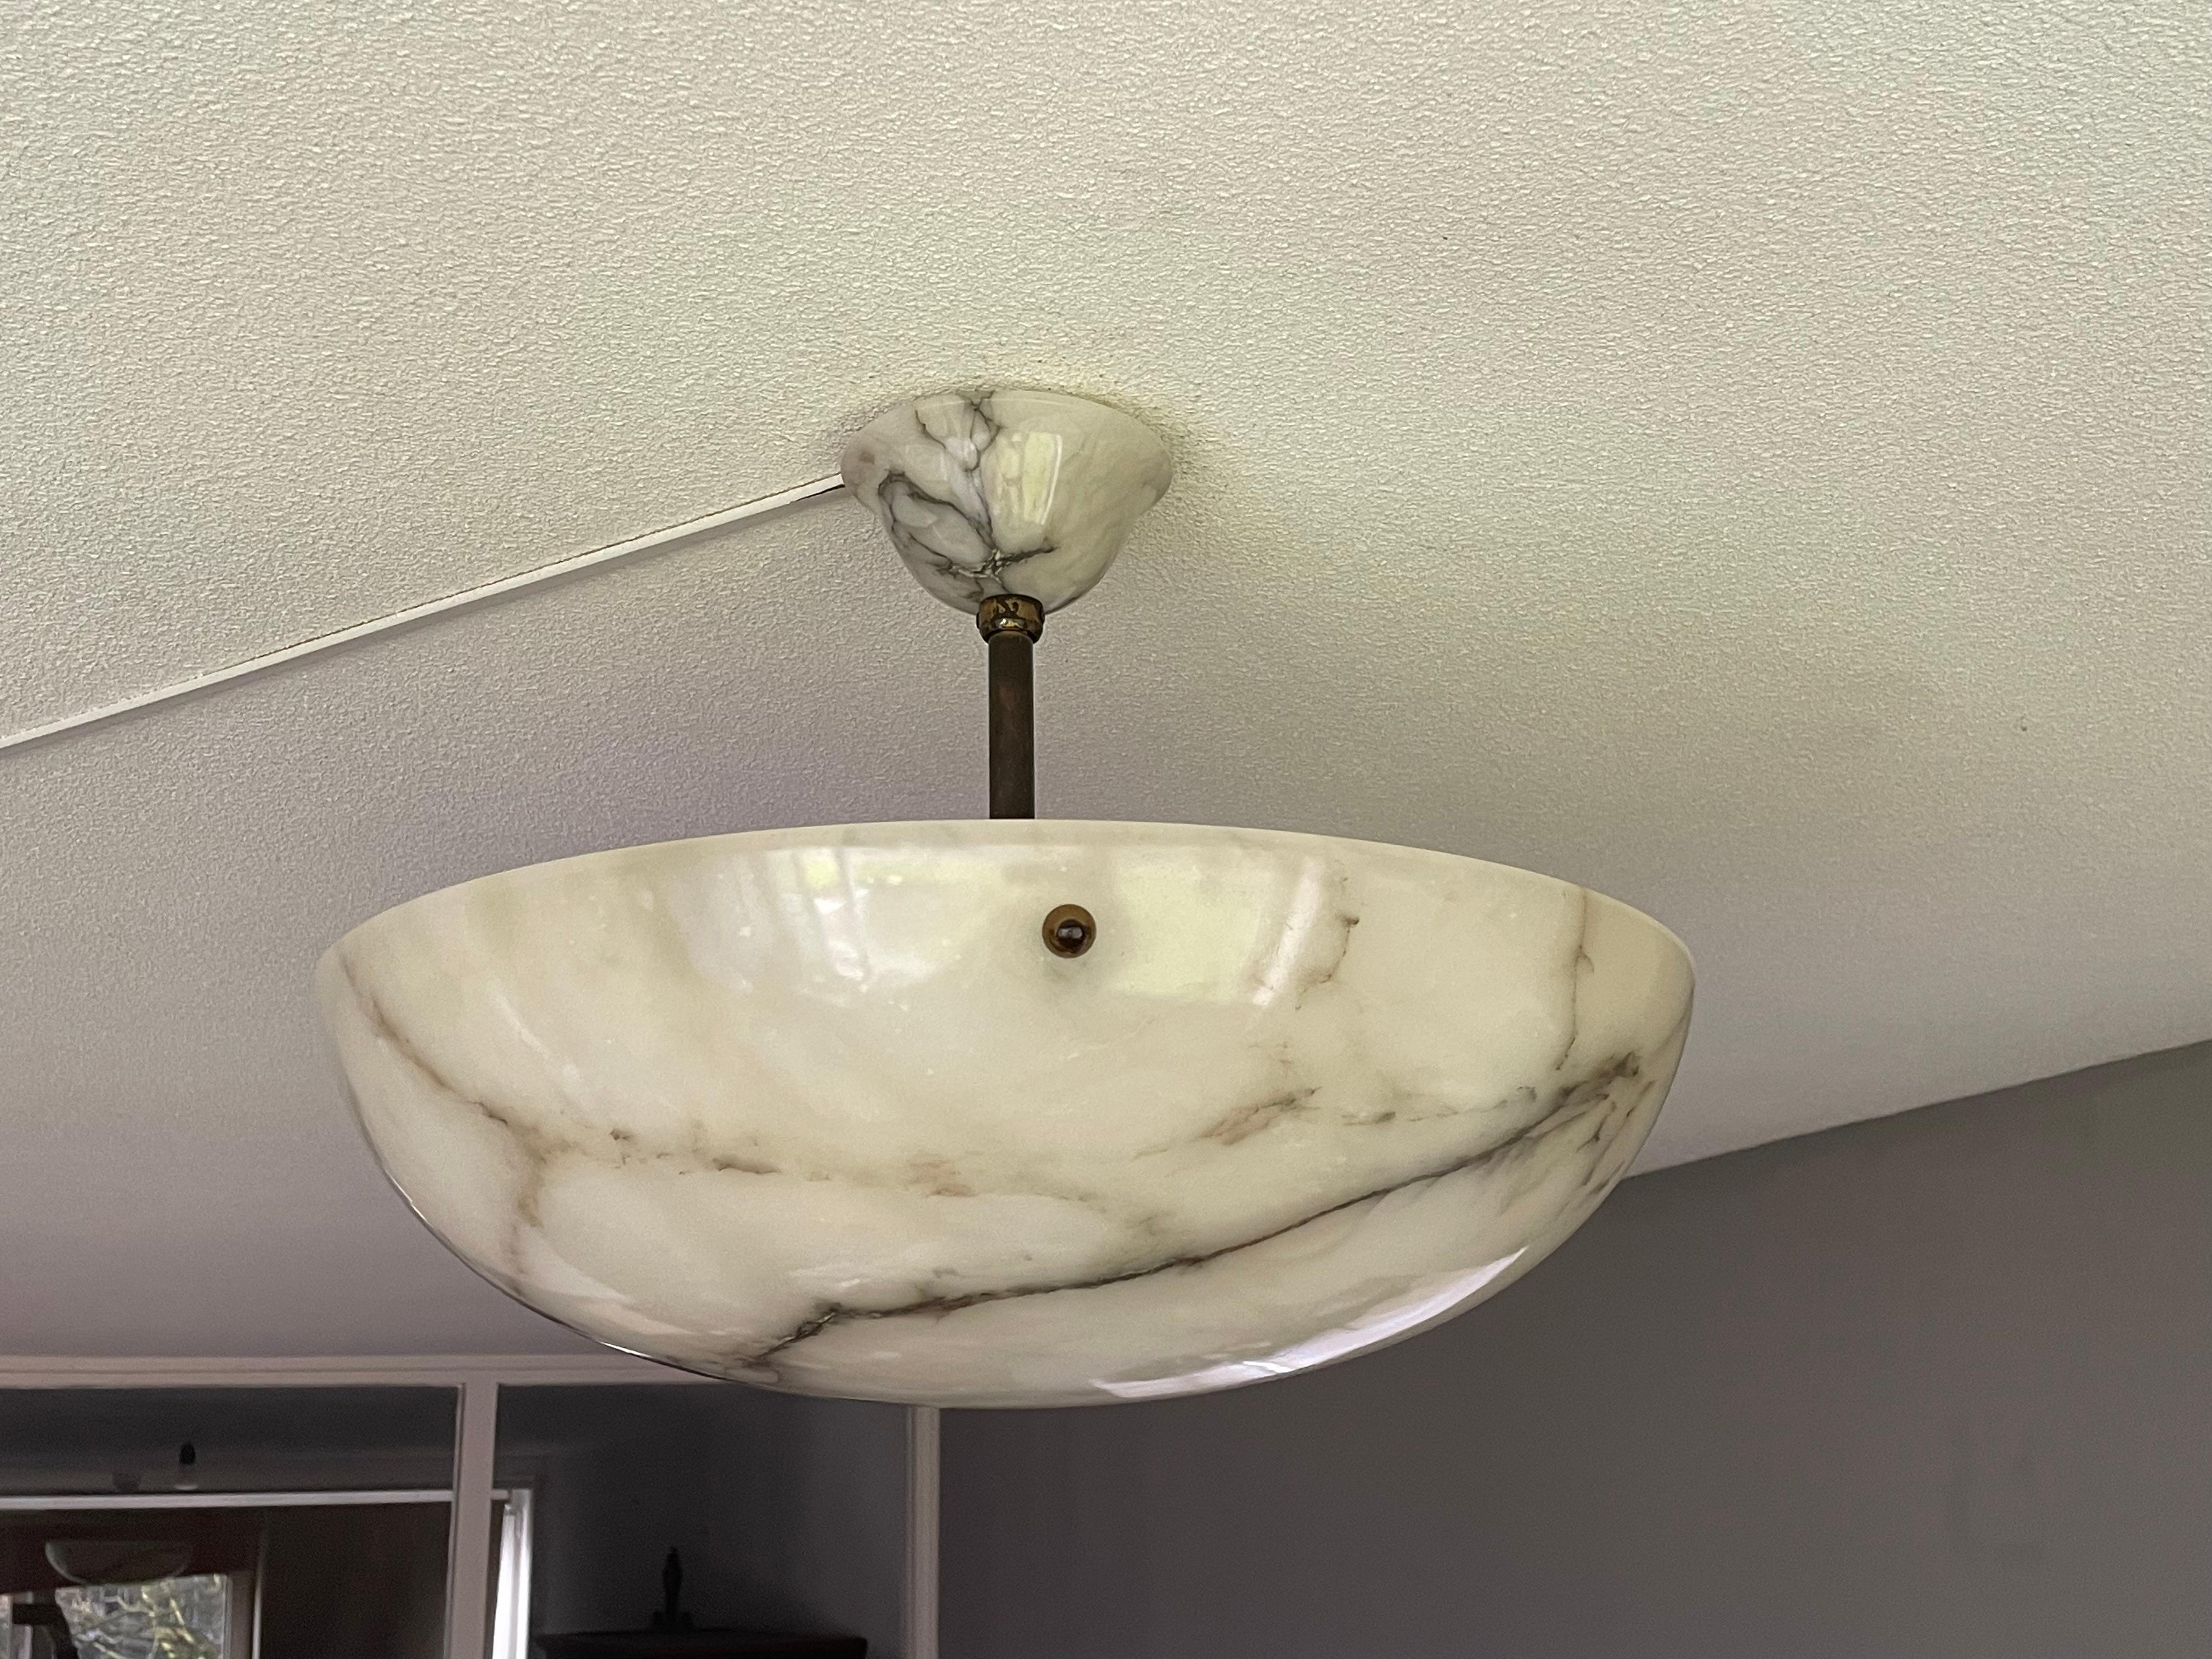 Stunning marble-like flush mount with a great size alabaster mineral stone shade.

Thanks to its large size, its deep bowl shape and its timeless design this three light alabaster flush mount is bound to light up both your days and evenings. It is